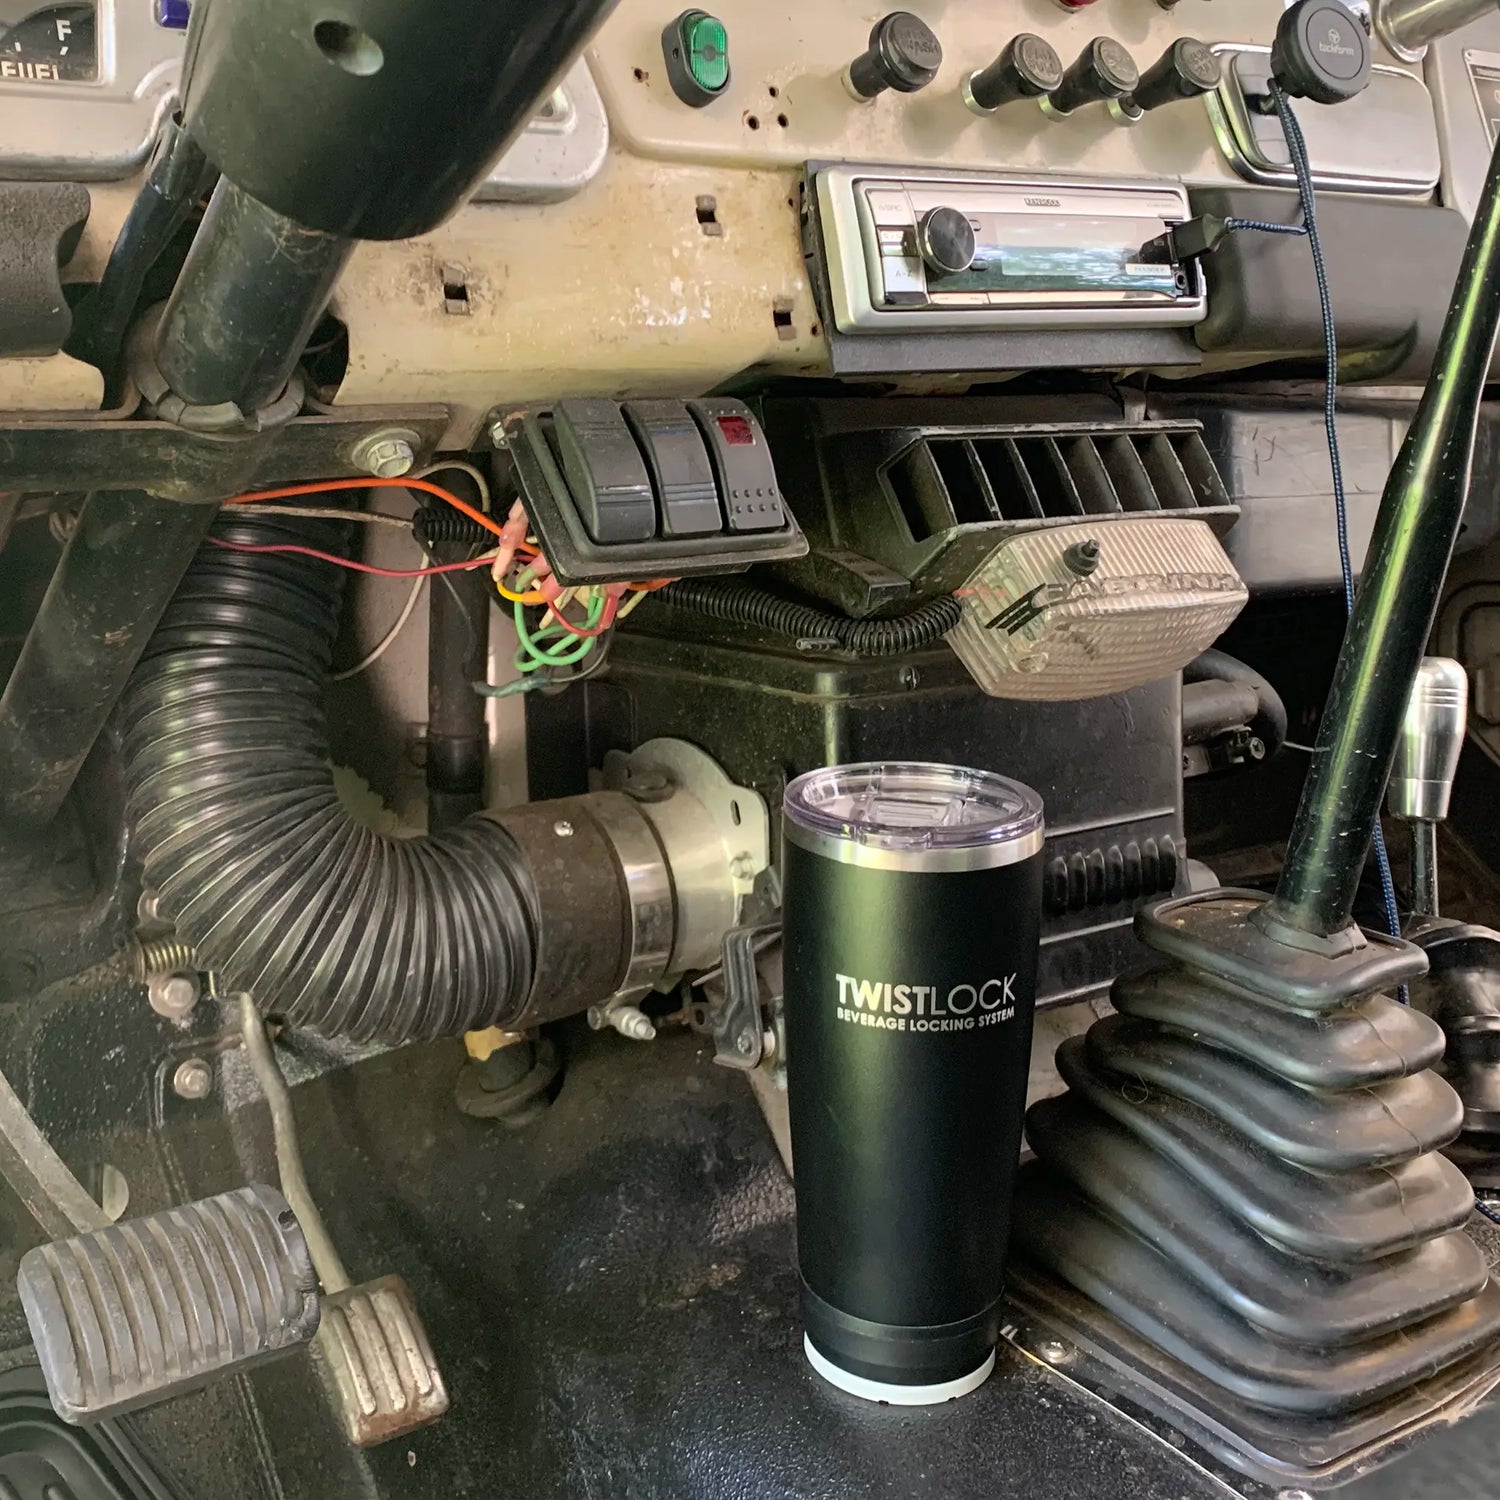 Low profile mini disc locking cup holder on the floor of an old truck with a tumbler in it.